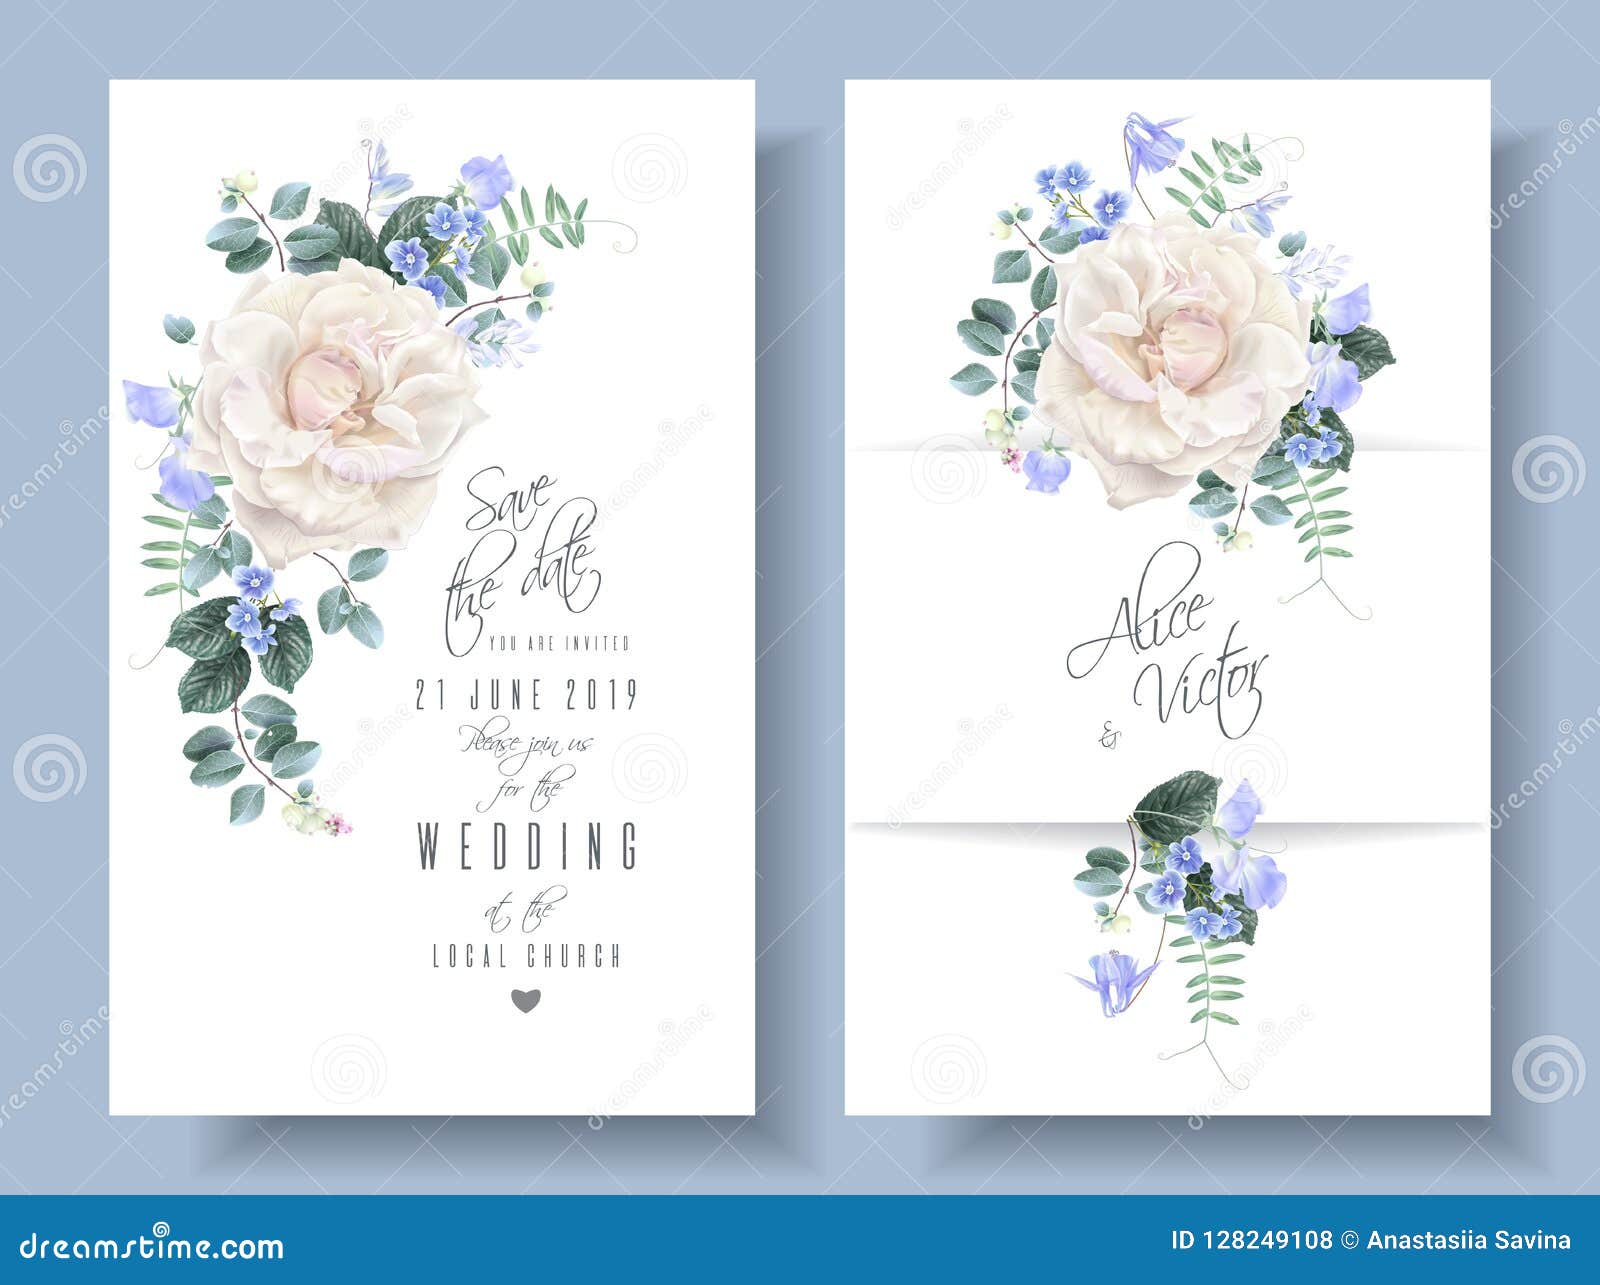 Vector Vintage Floral Wedding Cards with Roses Stock Vector - Illustration  of nature, party: 128249108